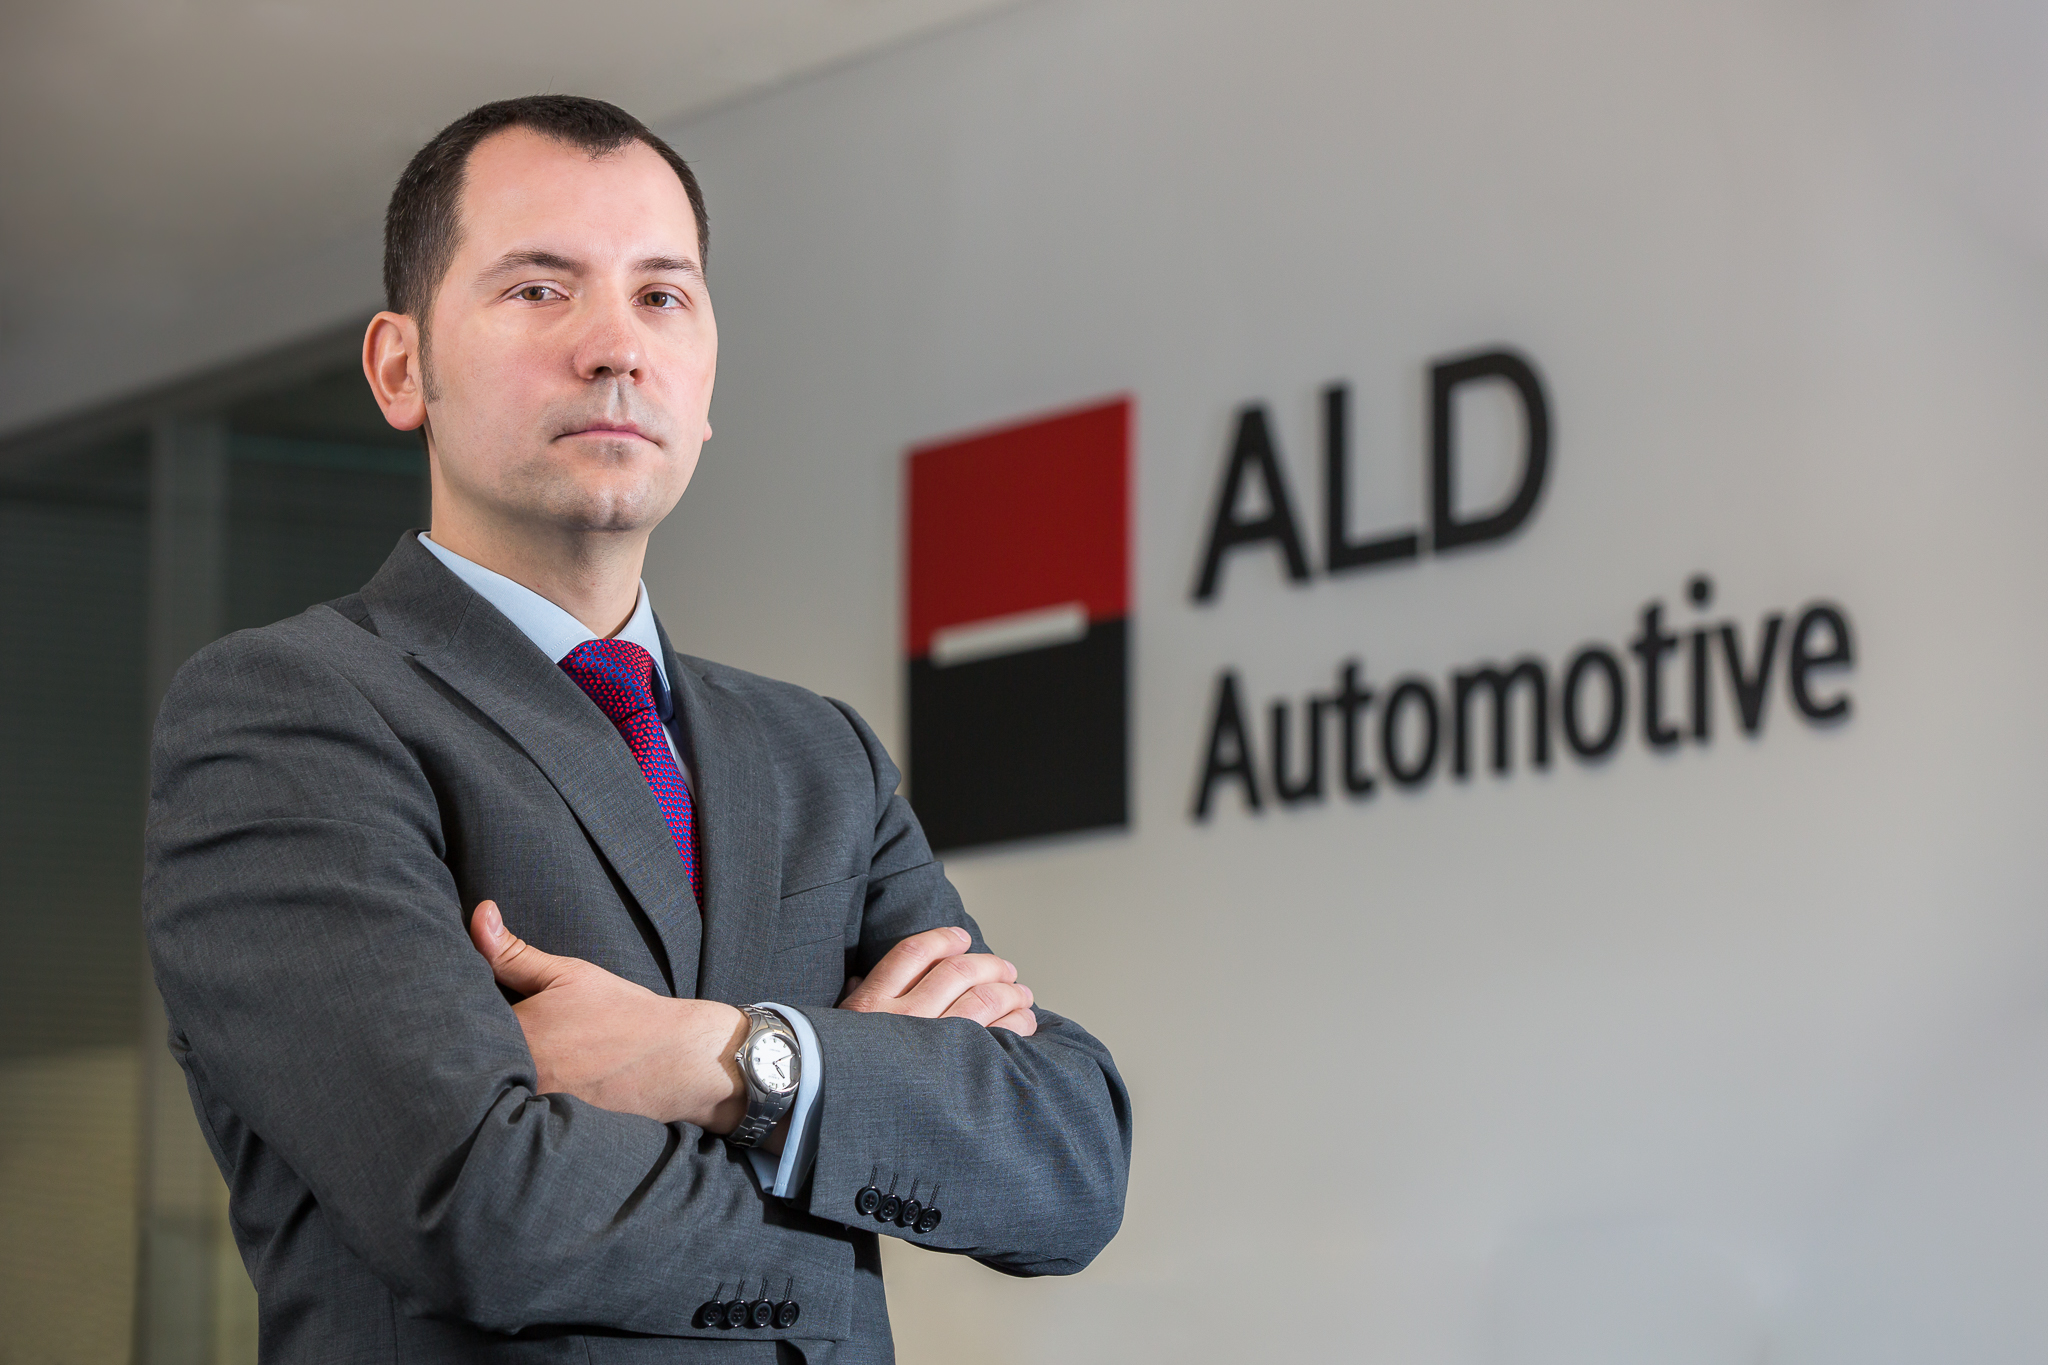 ALD Automotive appoints Catalin Olteanu as Commercial Director